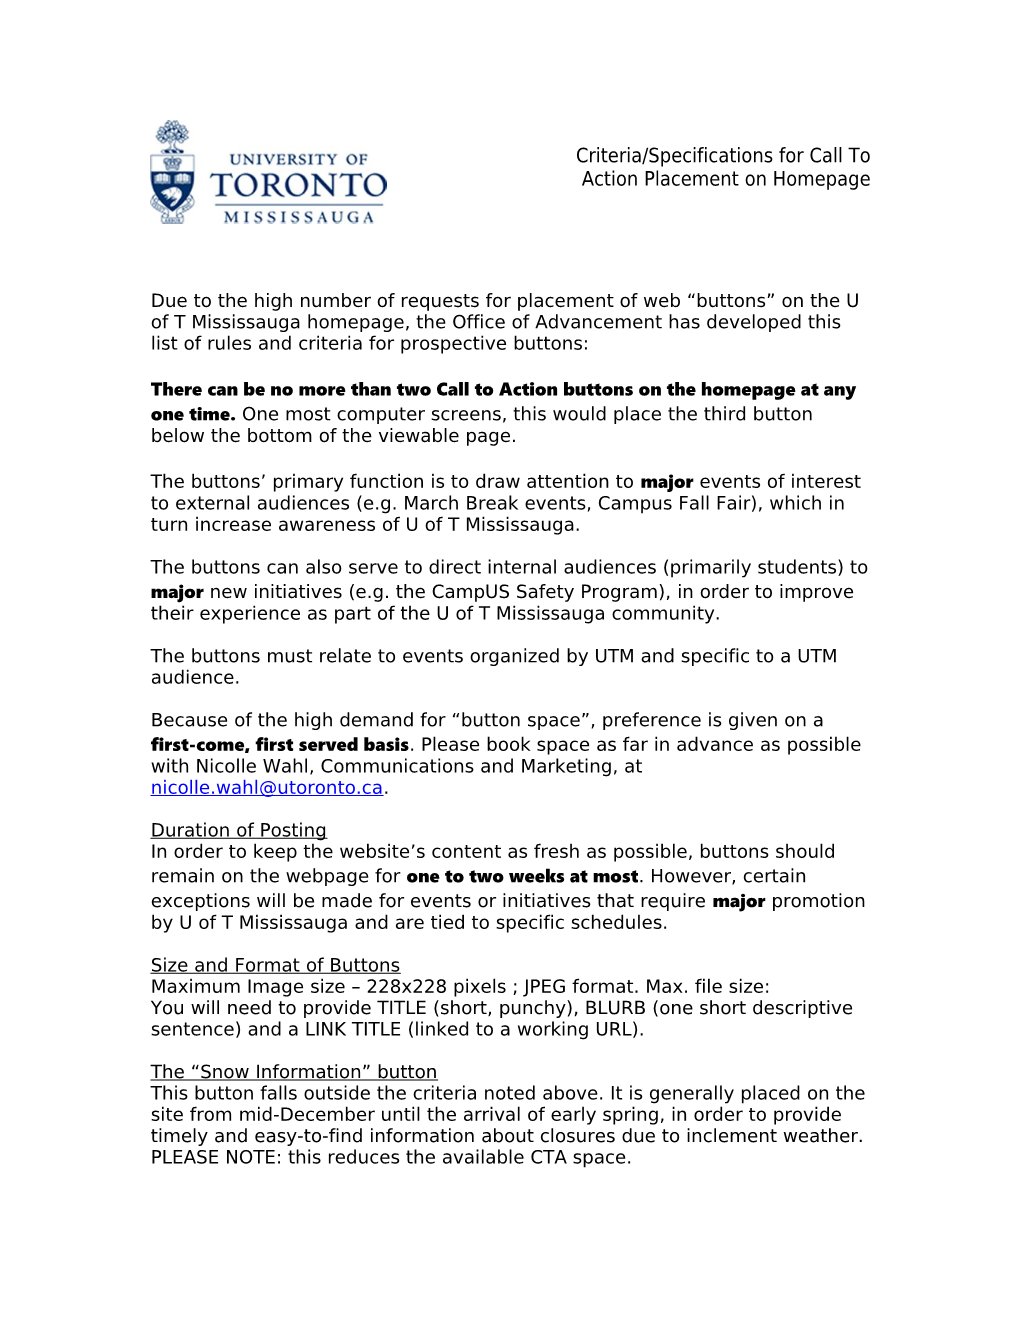 Criteria for Web Button Placement on U of T Mississauga Homepage